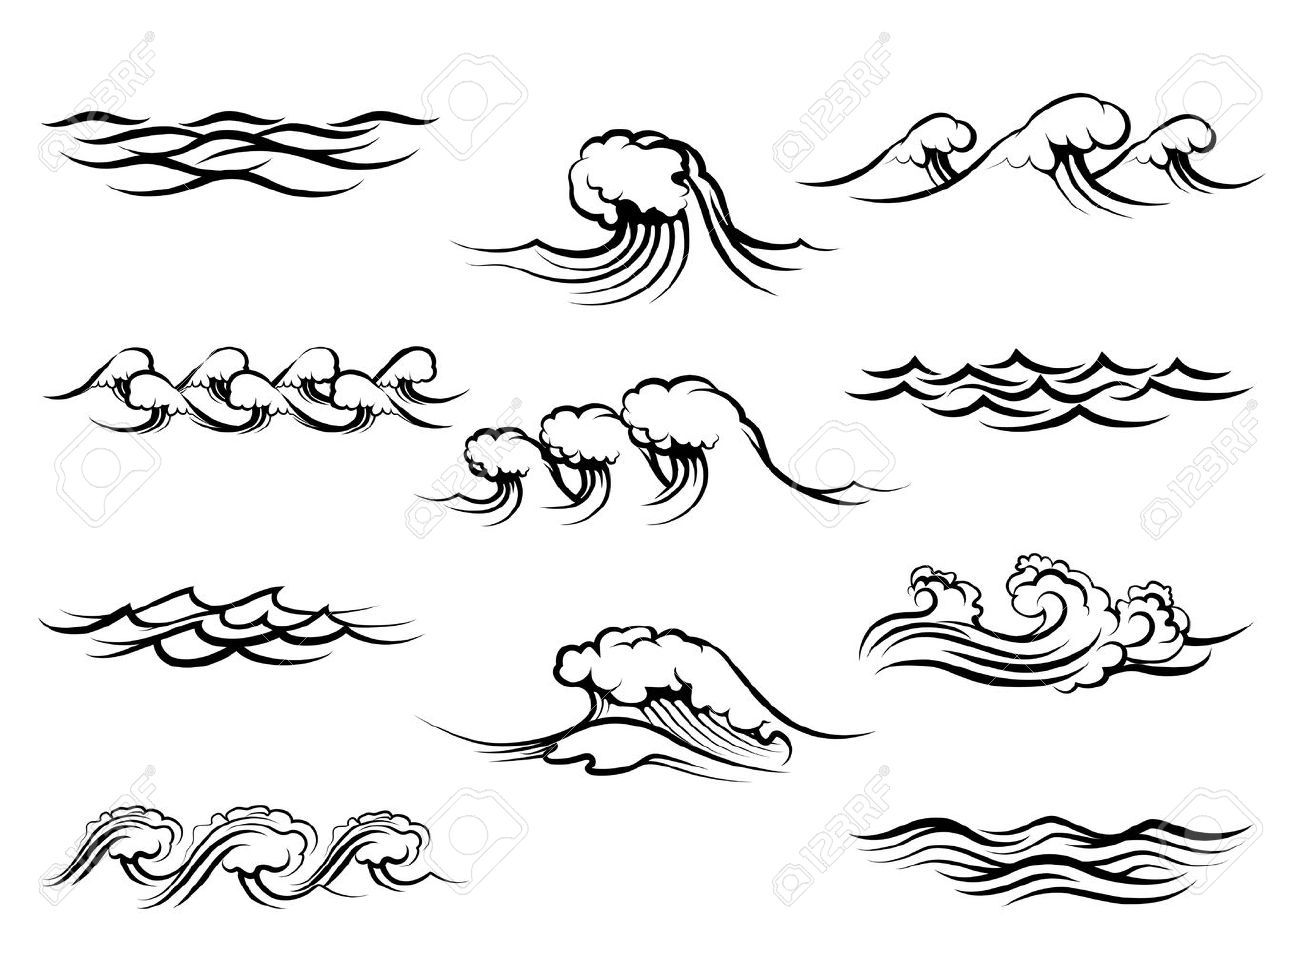 ocean animal clipart black and white 20 free Cliparts | Download images ...